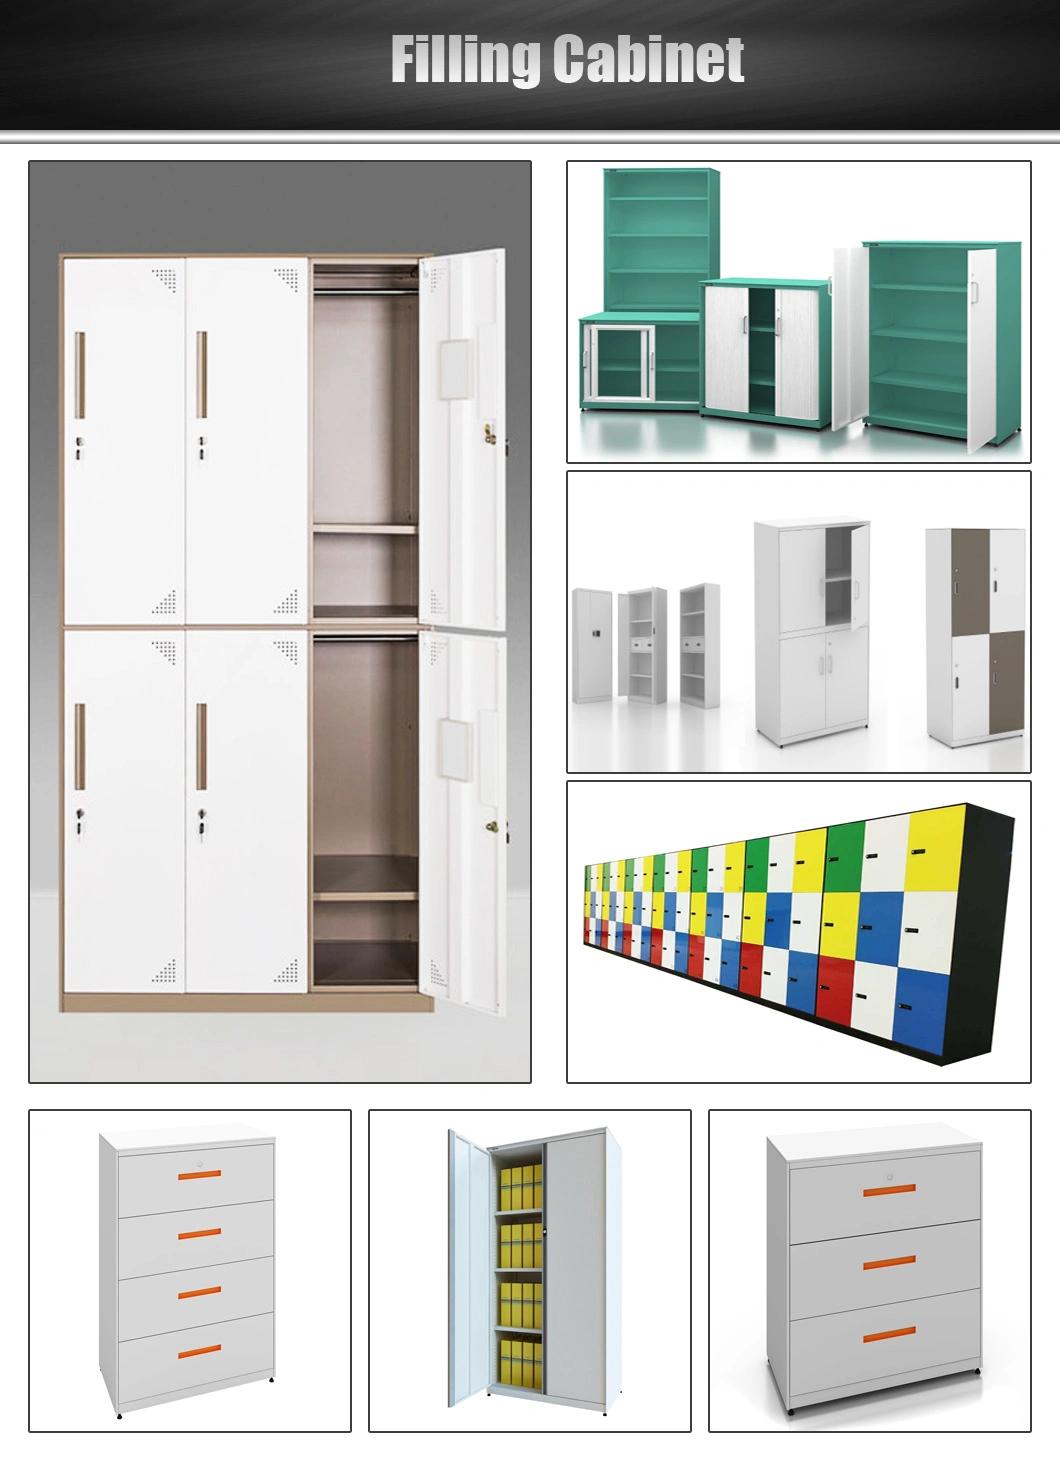 High Standard Work Storage Cabinets with Environmentally-Friendly Materials